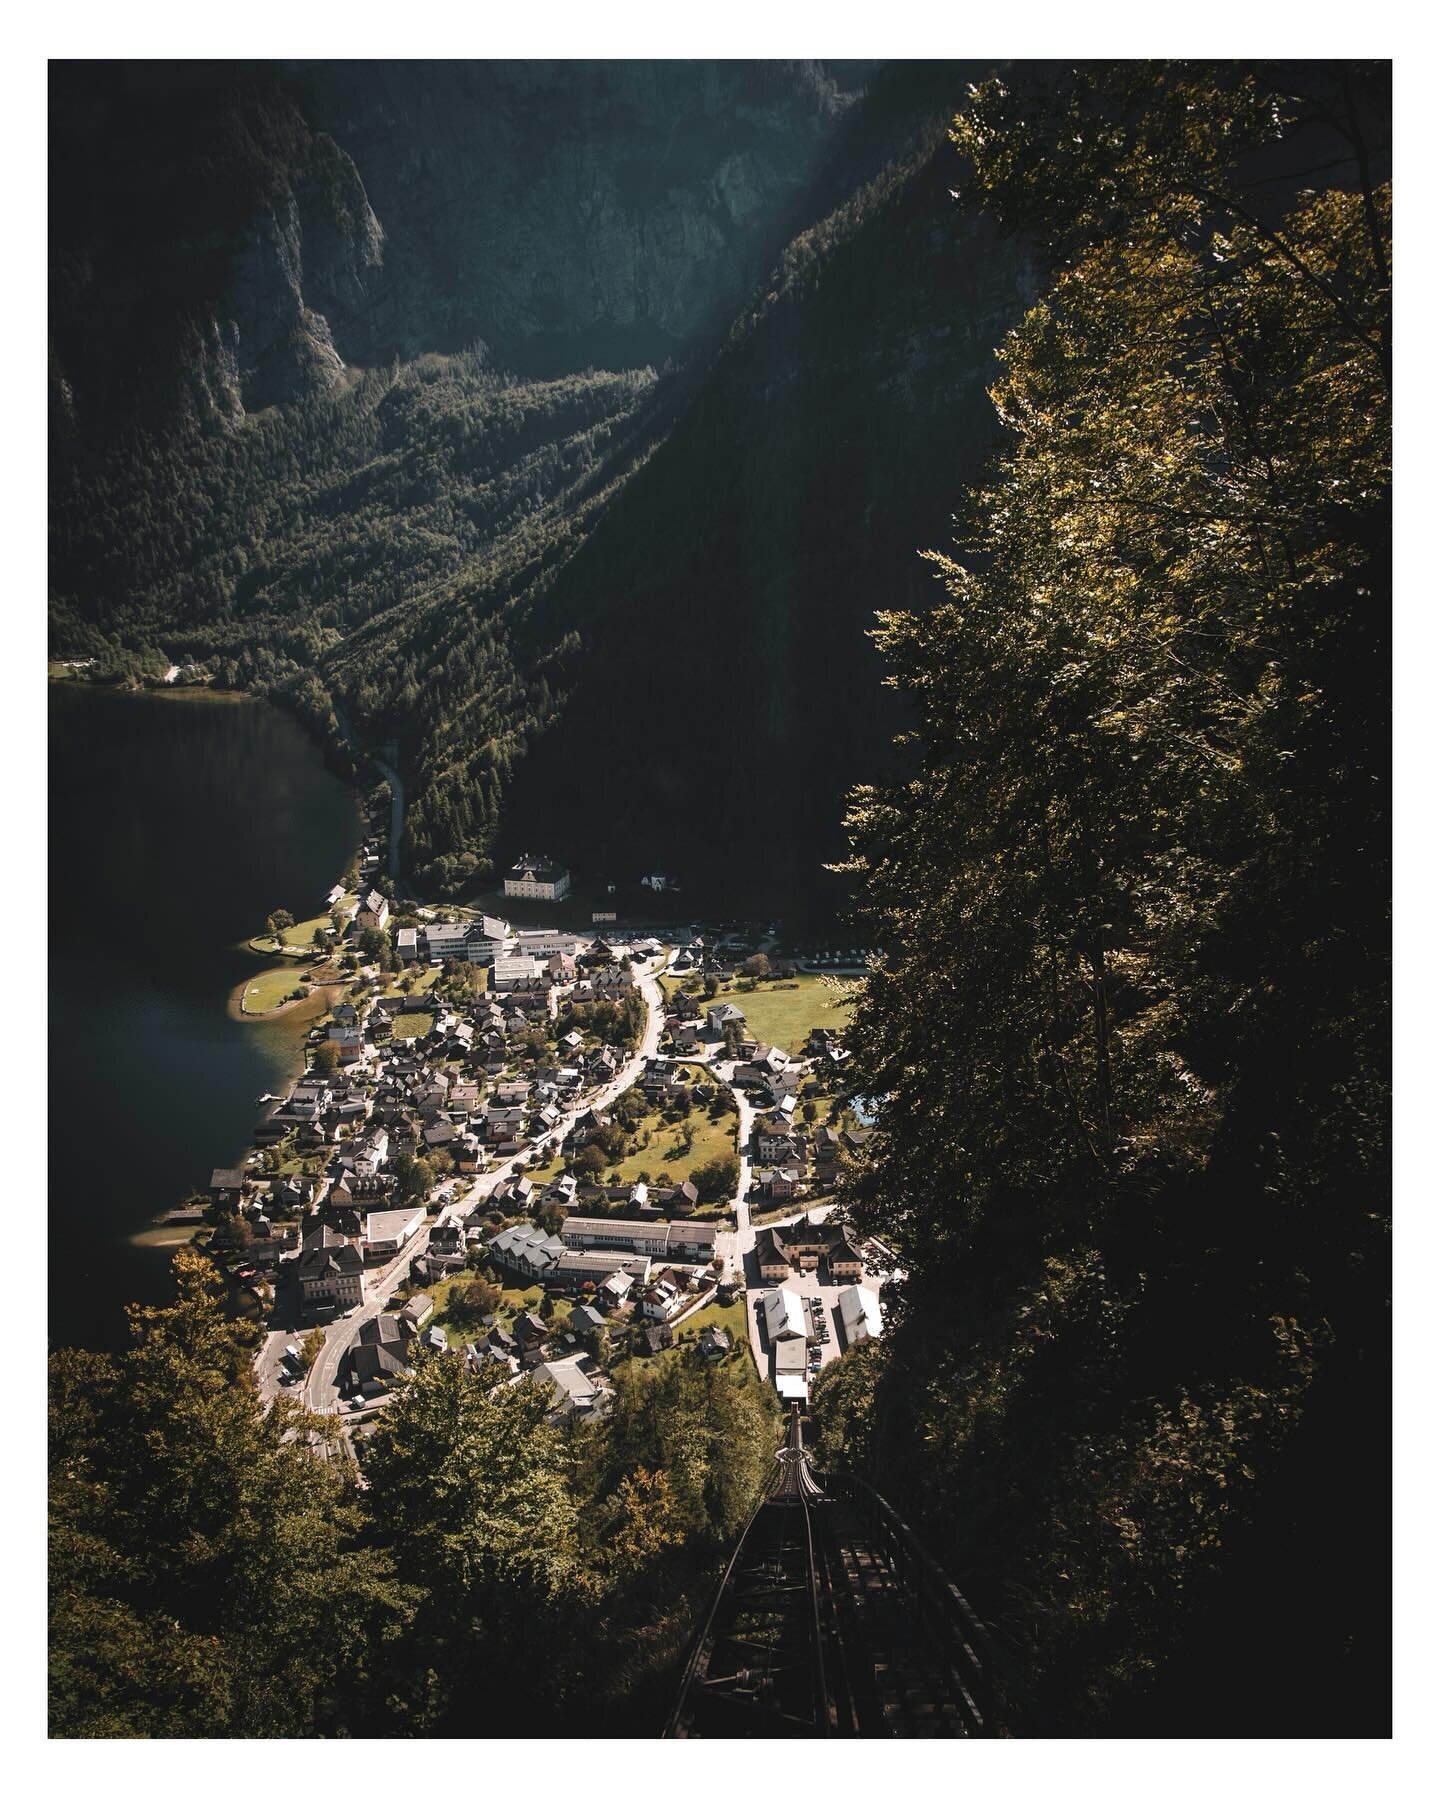 The Salzberg cable car takes you comfortably up to the Hallstatt high valley. The panoramic lift and bridge continue to the restaurant and viewing platform. Here you can see the sun flooded valley from inside the cable car. What a view!

#landscape #